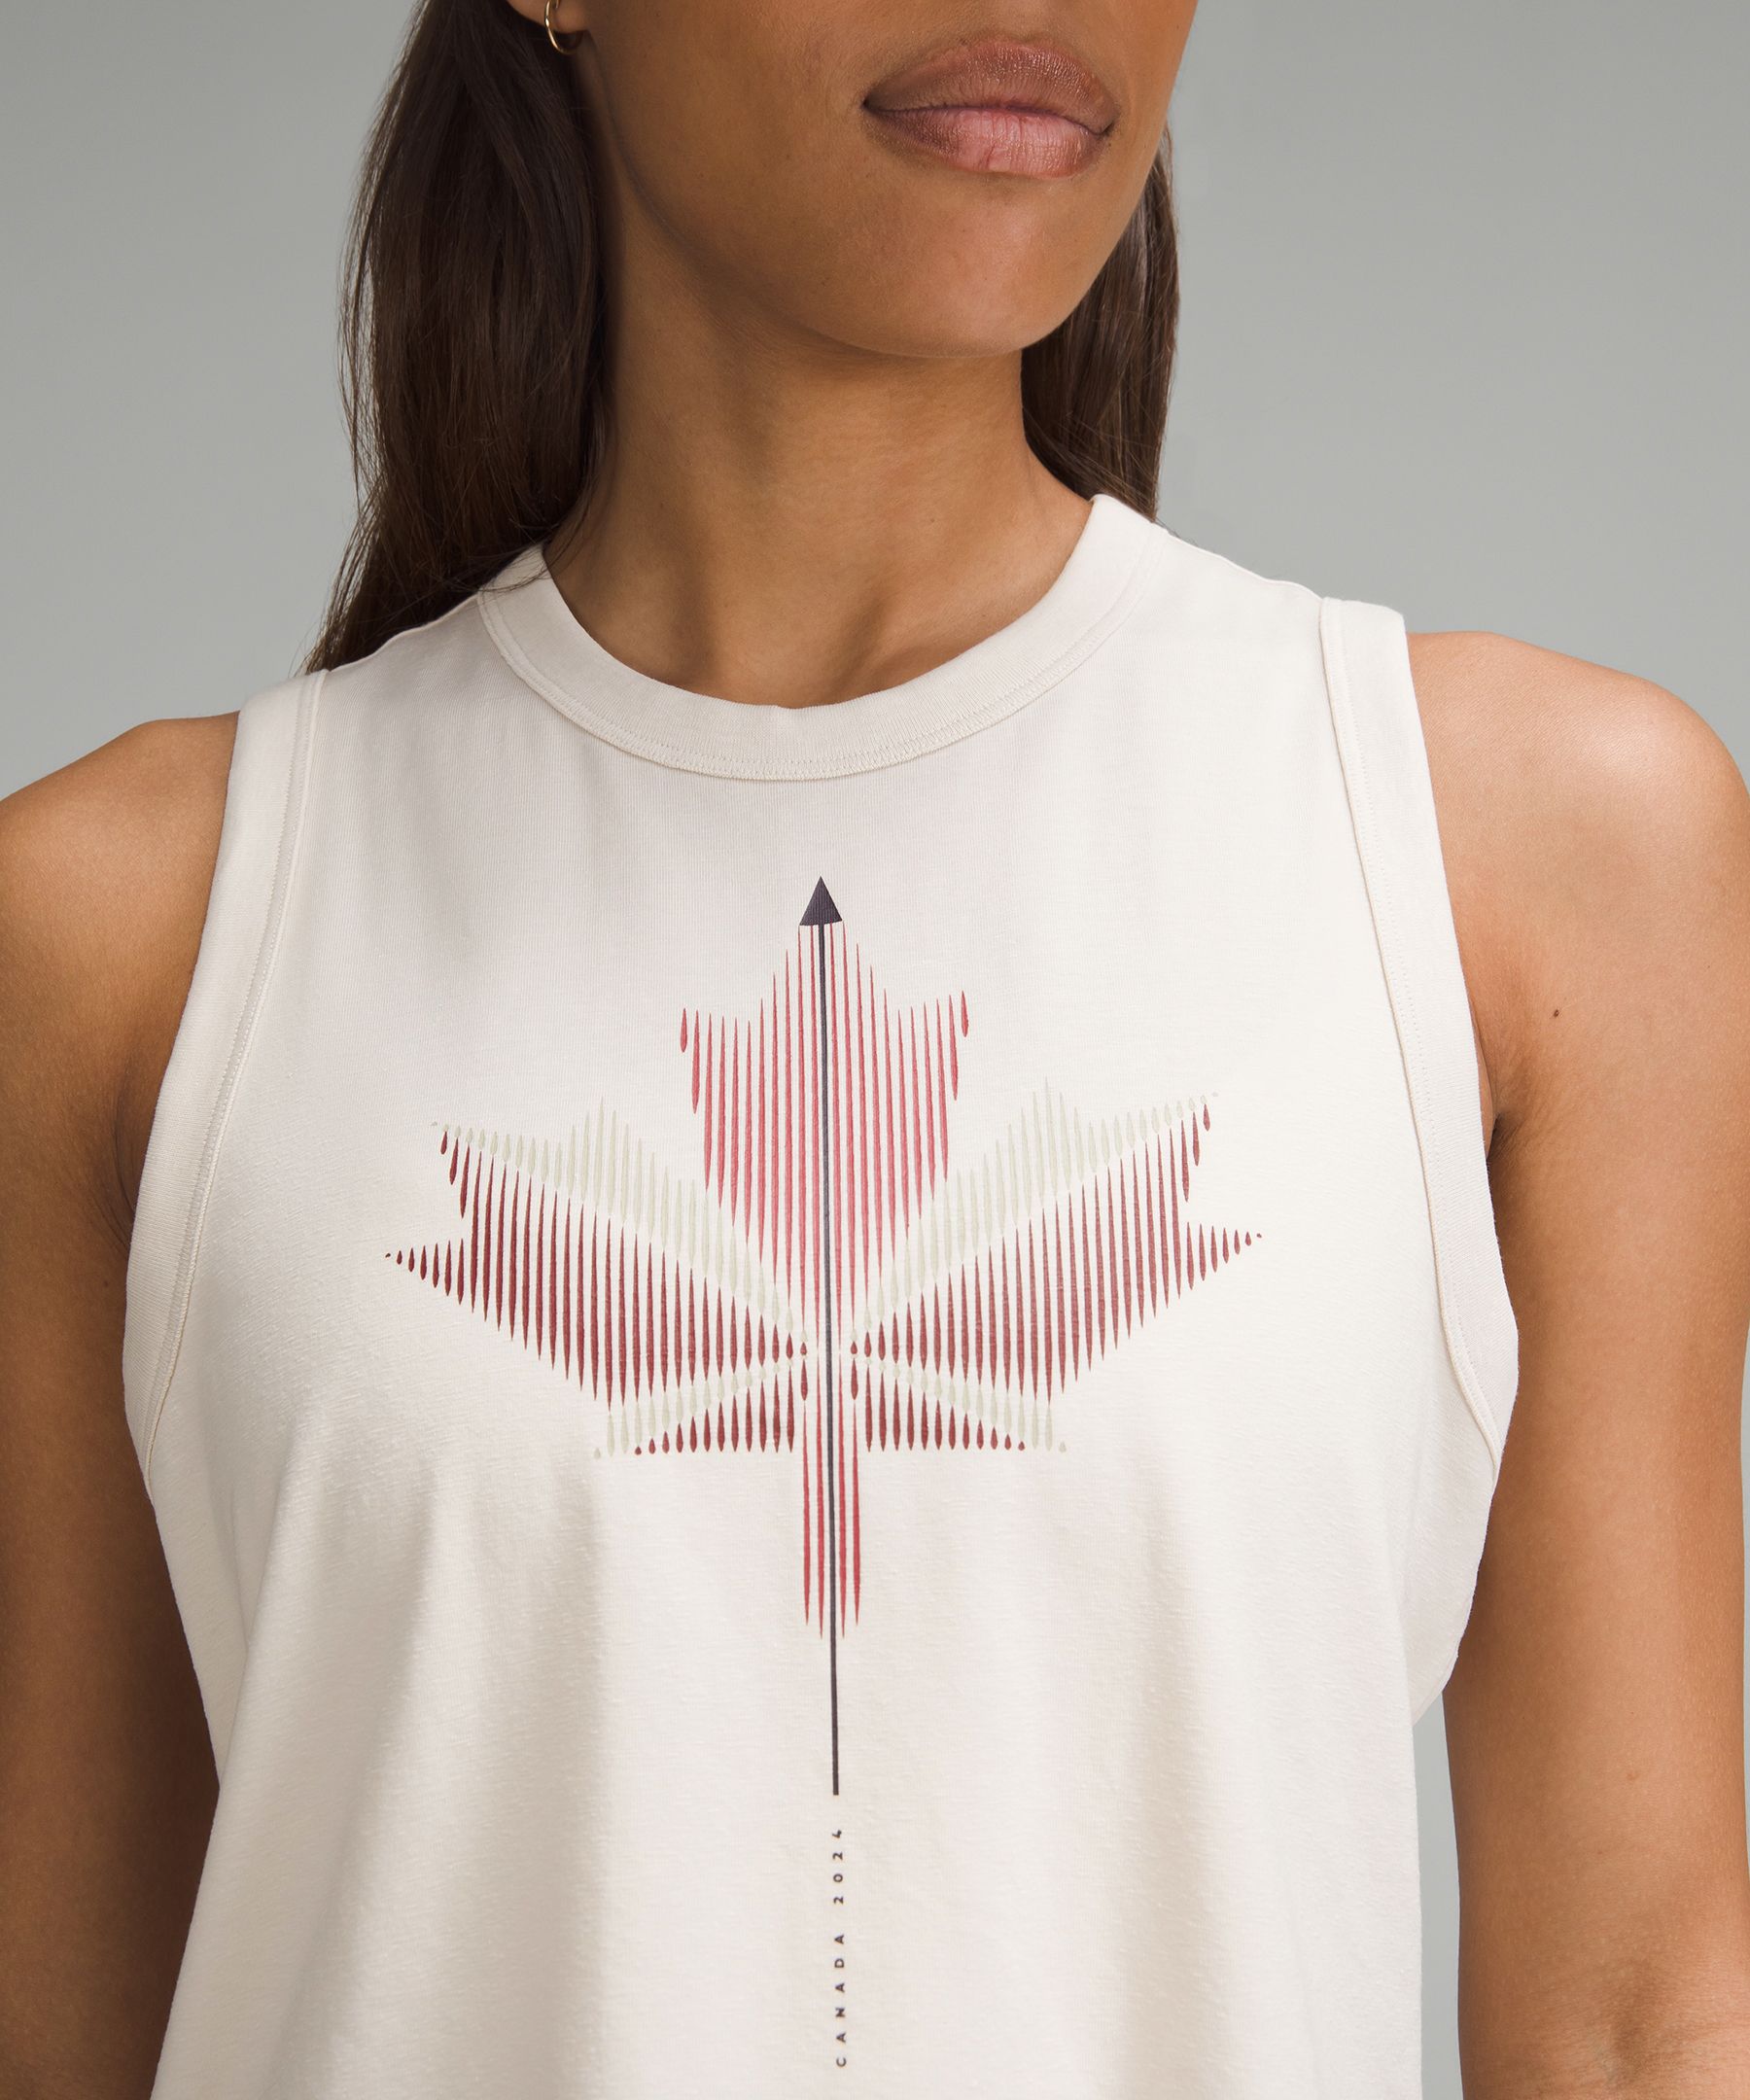 Team Canada Classic-Fit Cotton-Blend Tank Top *COC Logo | Women's Sleeveless & Tops